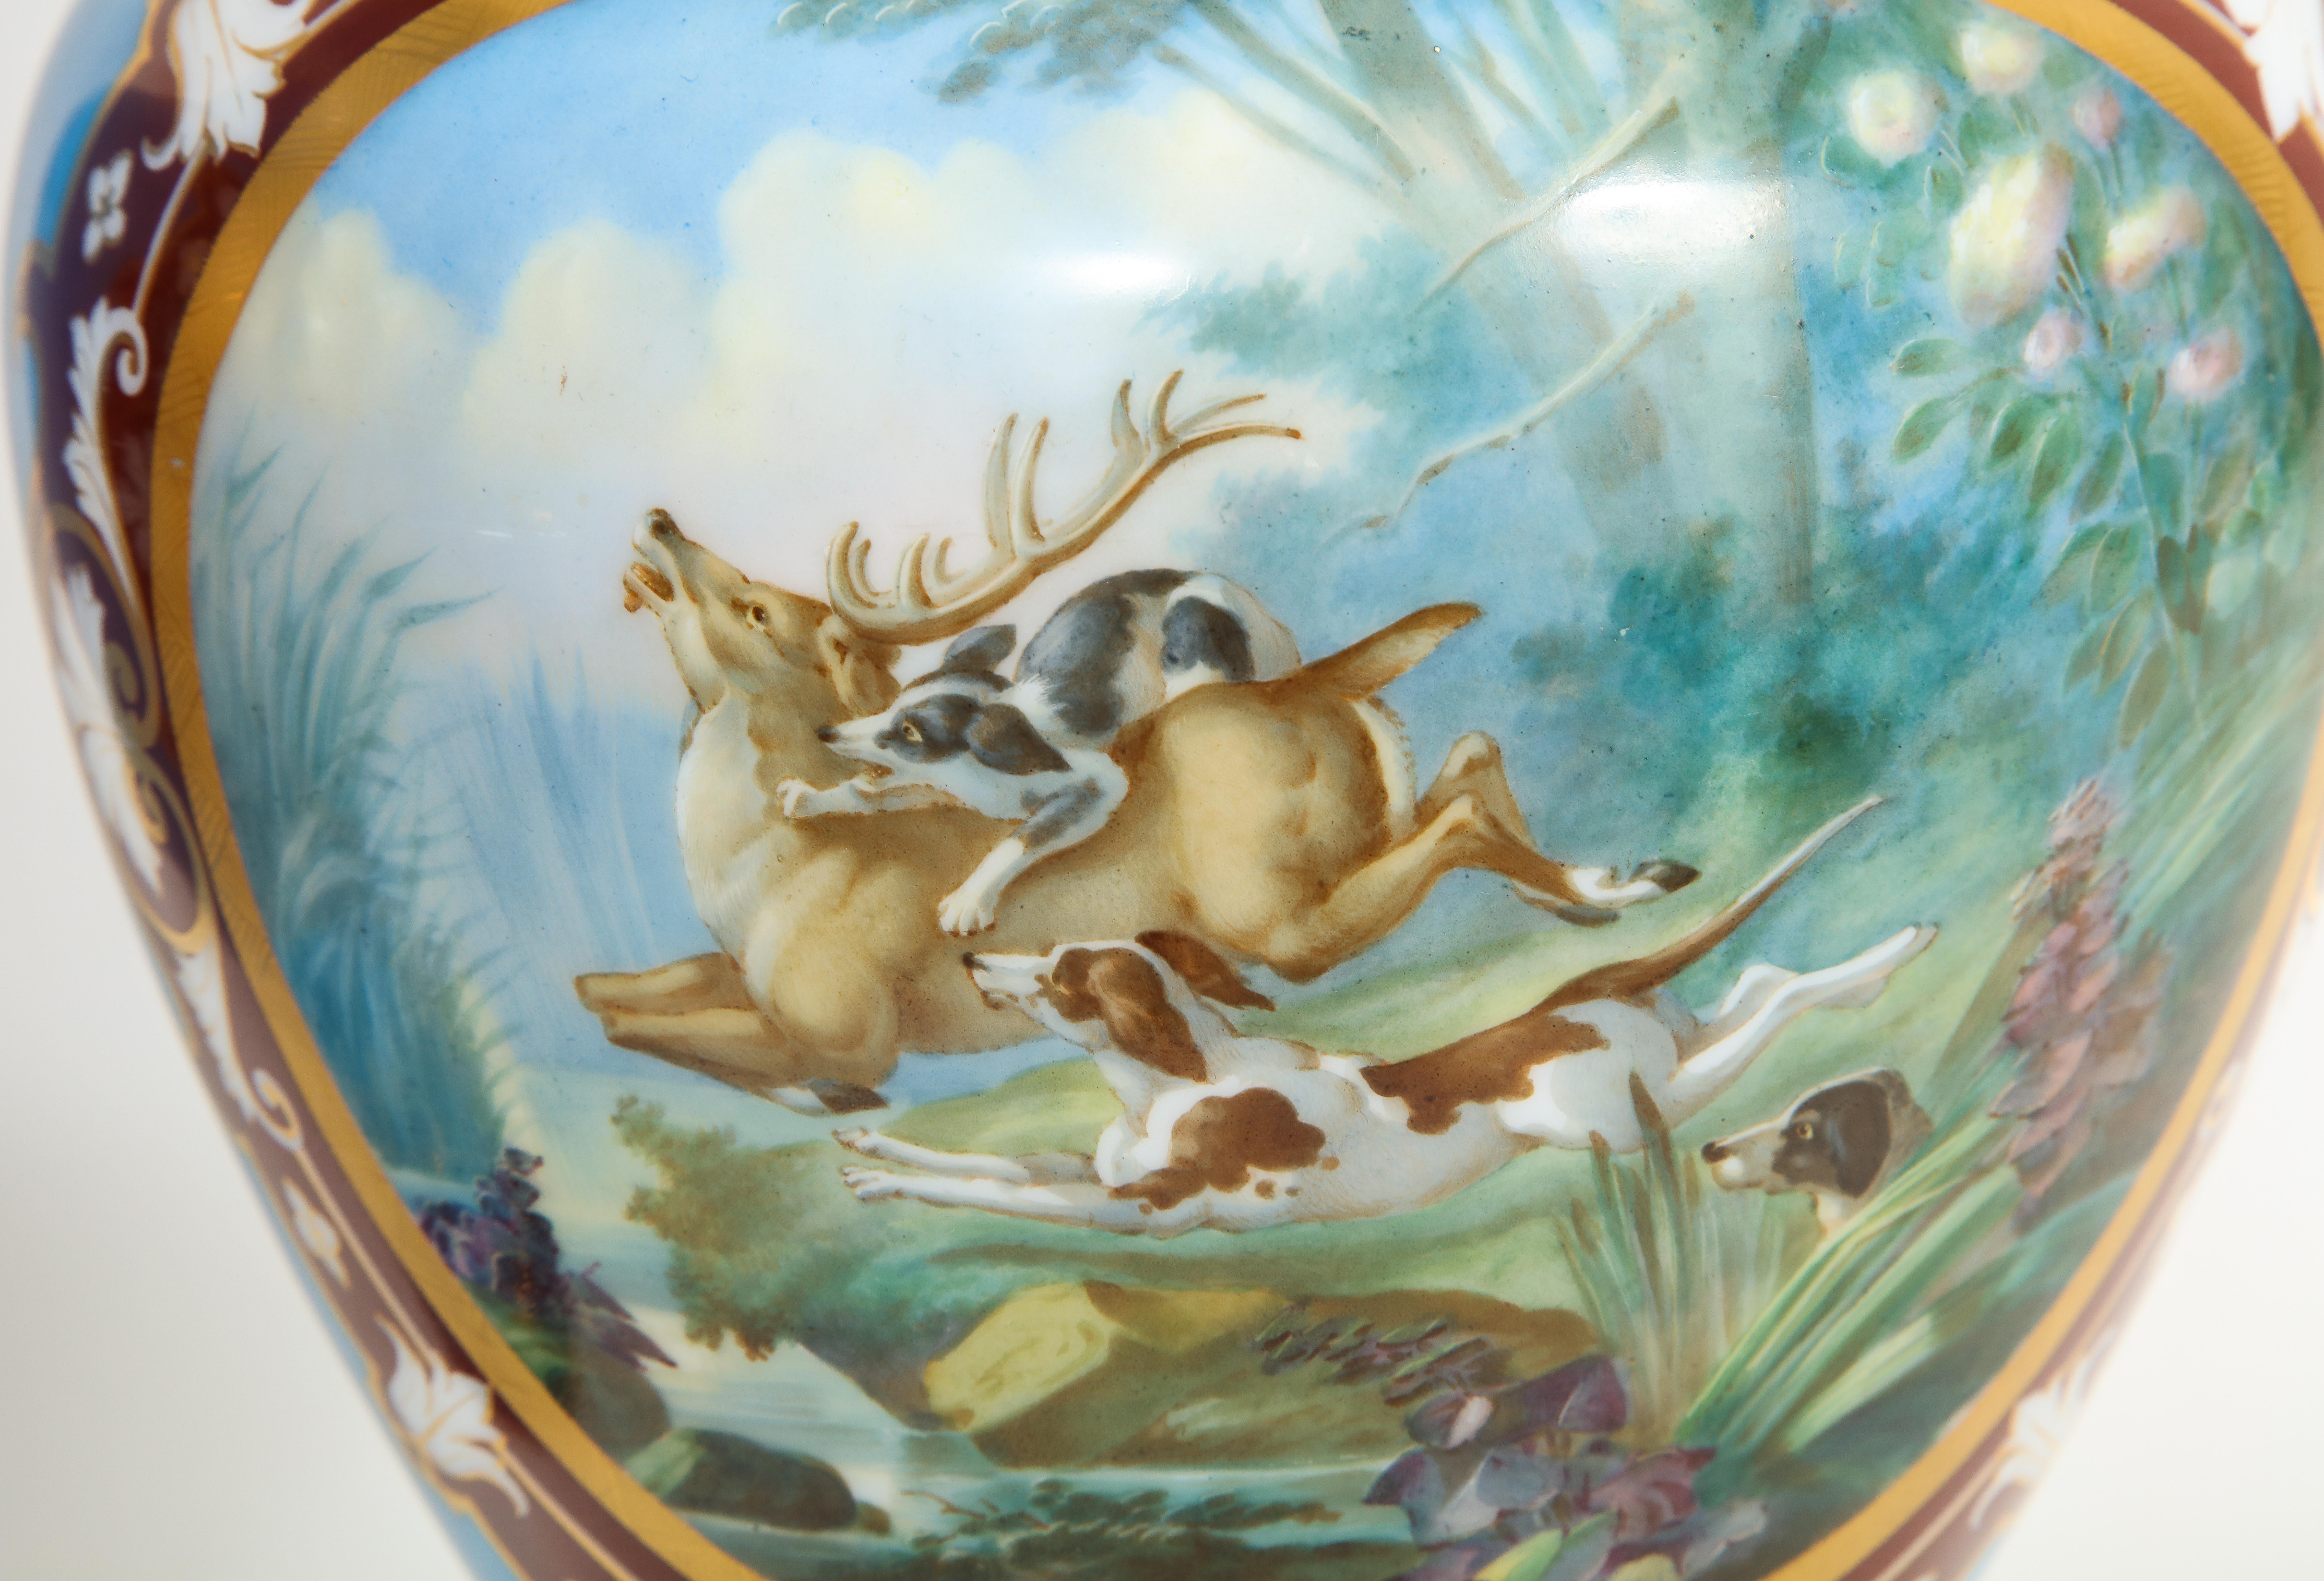 19th Century French Pair of Baccarat Enameled Opaline Vases with Hunting Scenes For Sale 8